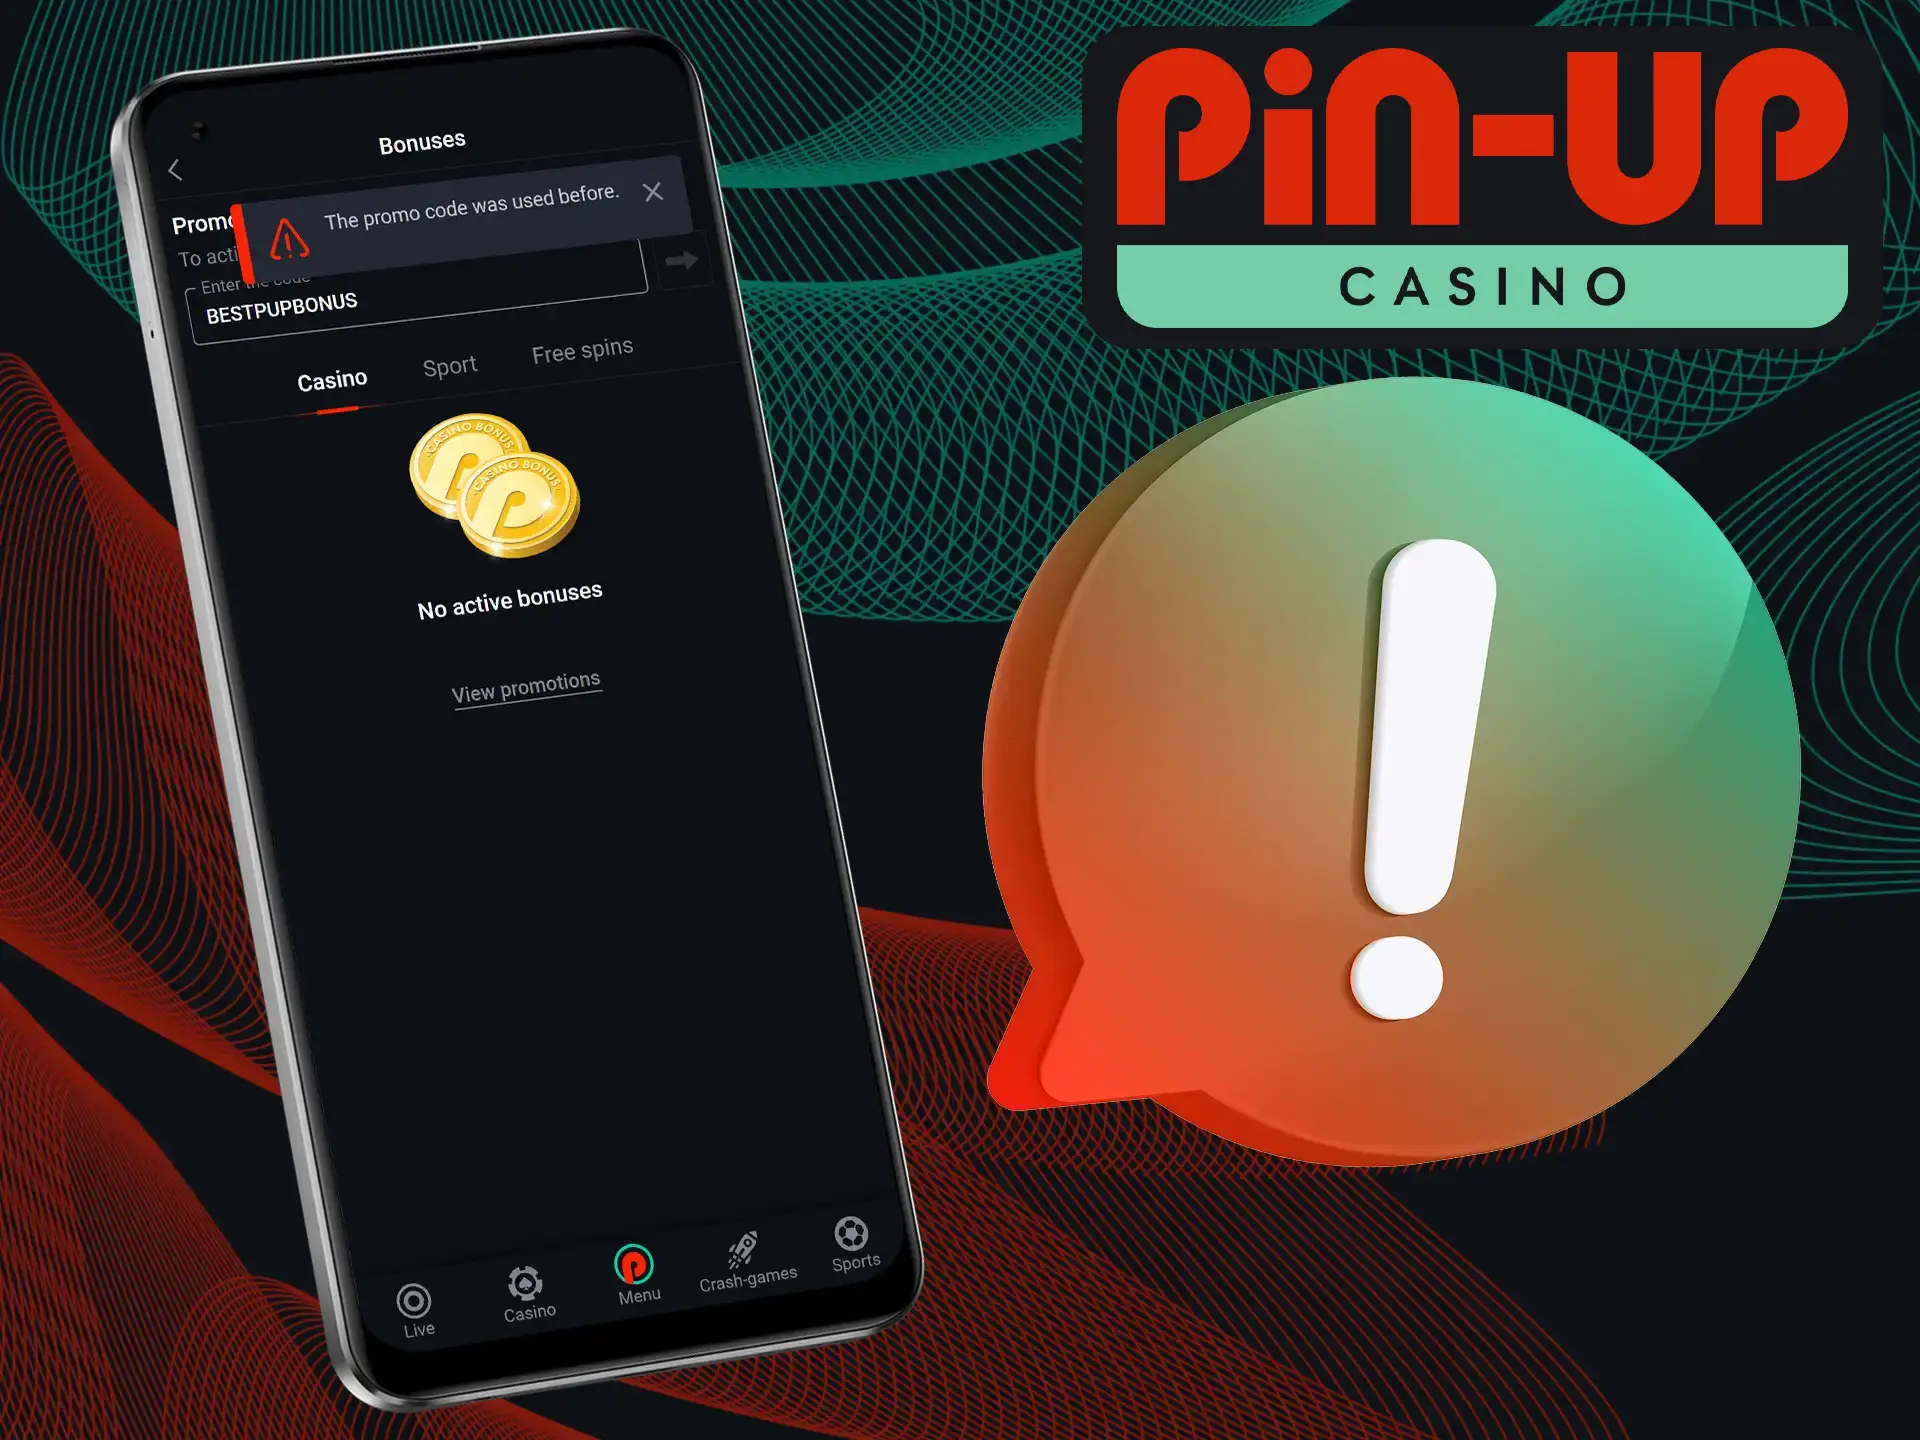 Double-check all information when using a Pin-Up bonus code to avoid missing out.